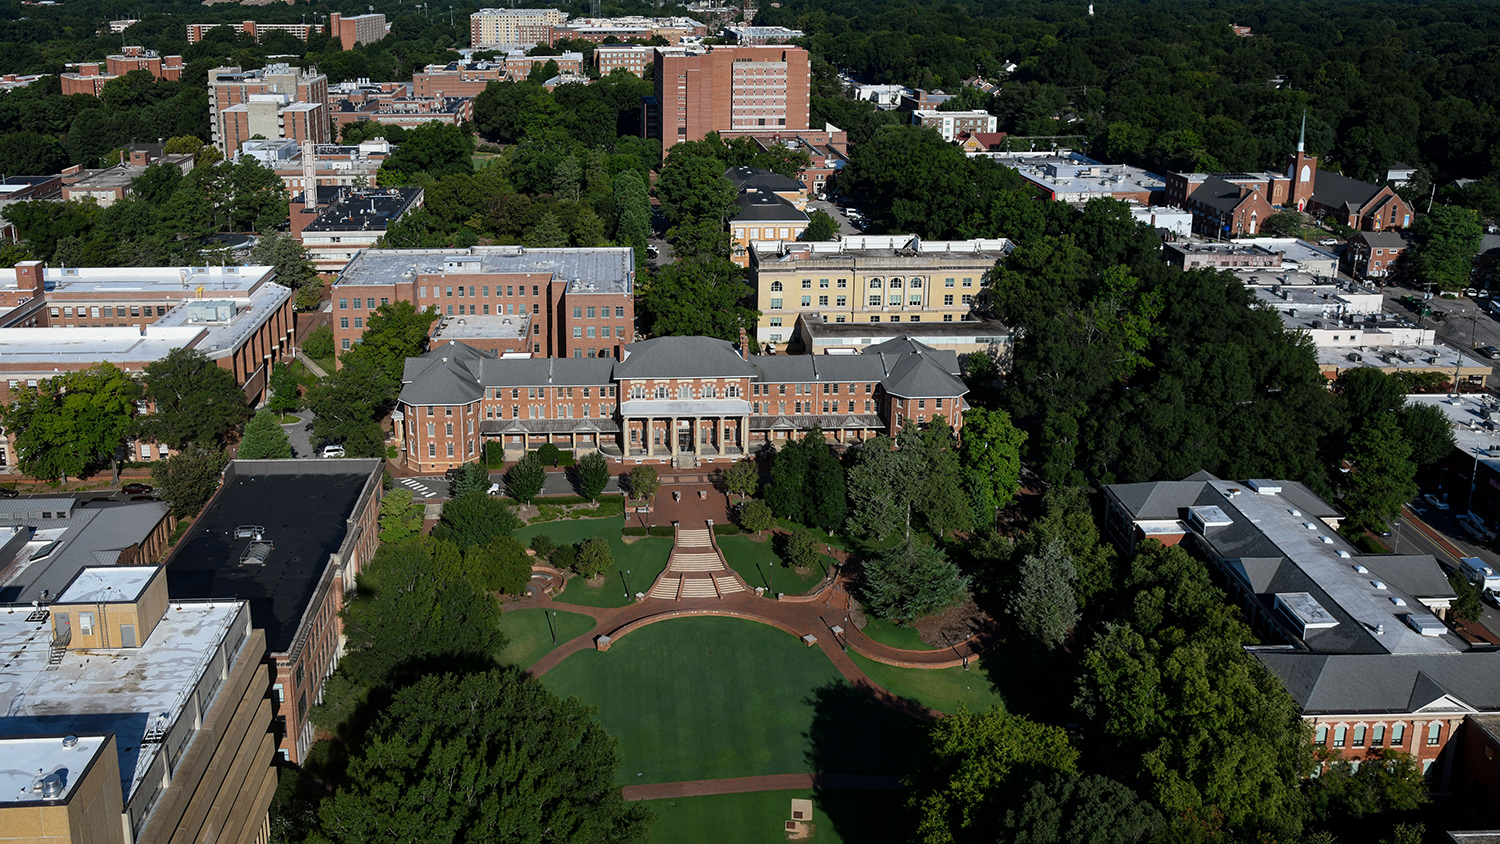 NC State main campus aerial view